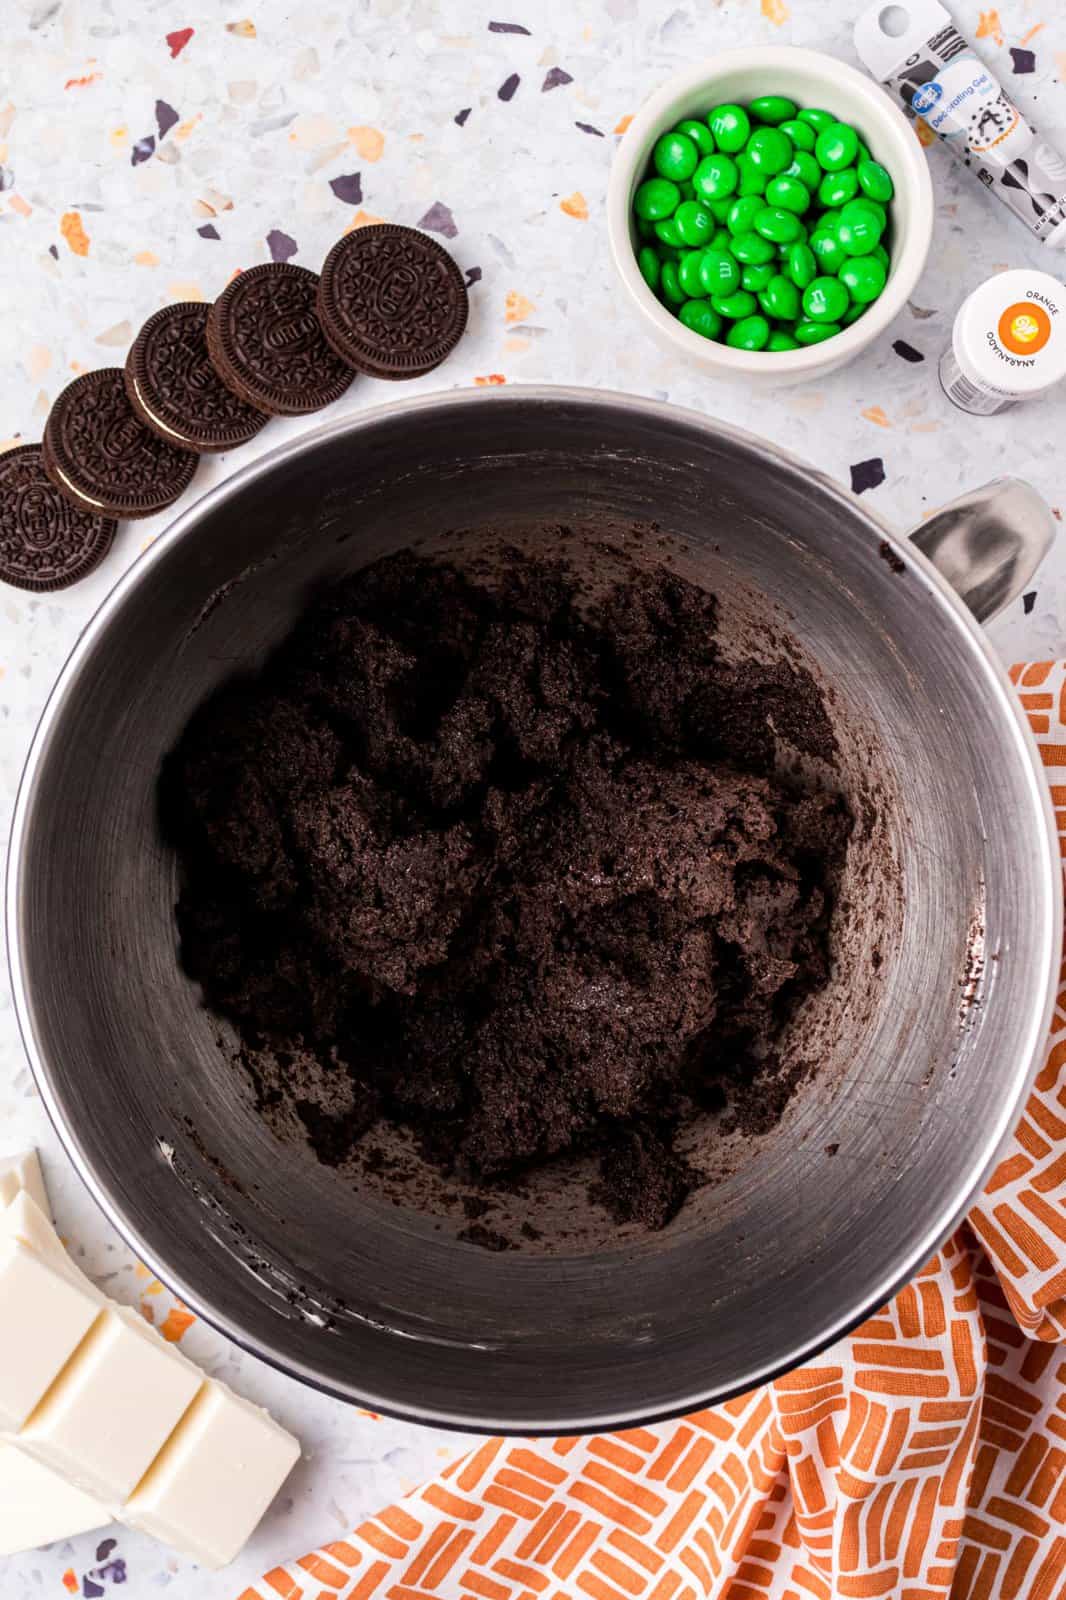 Cream cheese and Oreo crumbs mixed together in bowl of stand mixer.